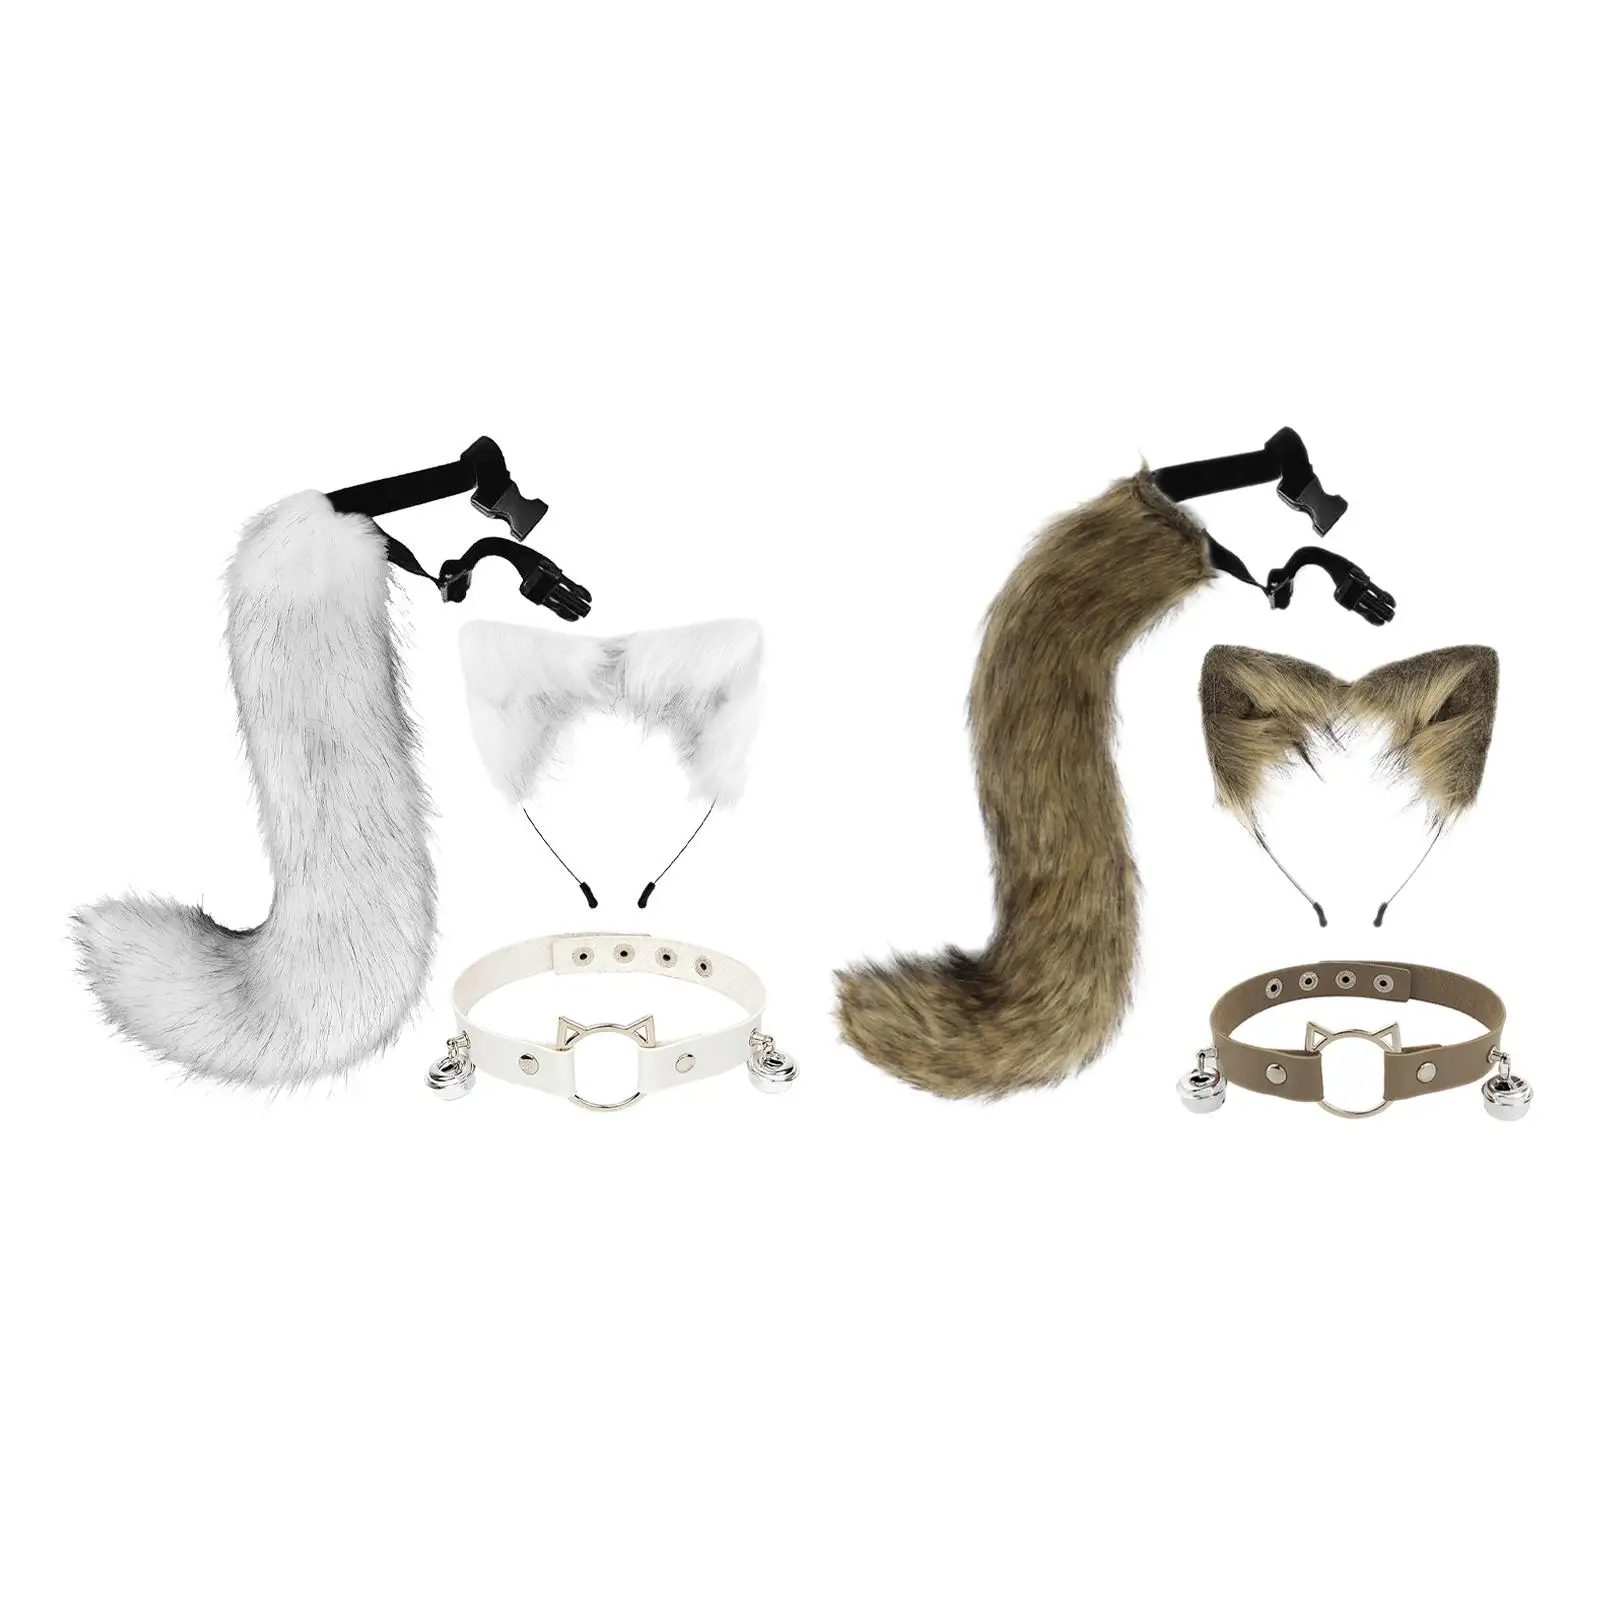 3Pcs Cat Ear and Tail Cat Ear Headband Lolita Cosplay Dress up for Women Girls Animals Ears and Long Tail for Carnival